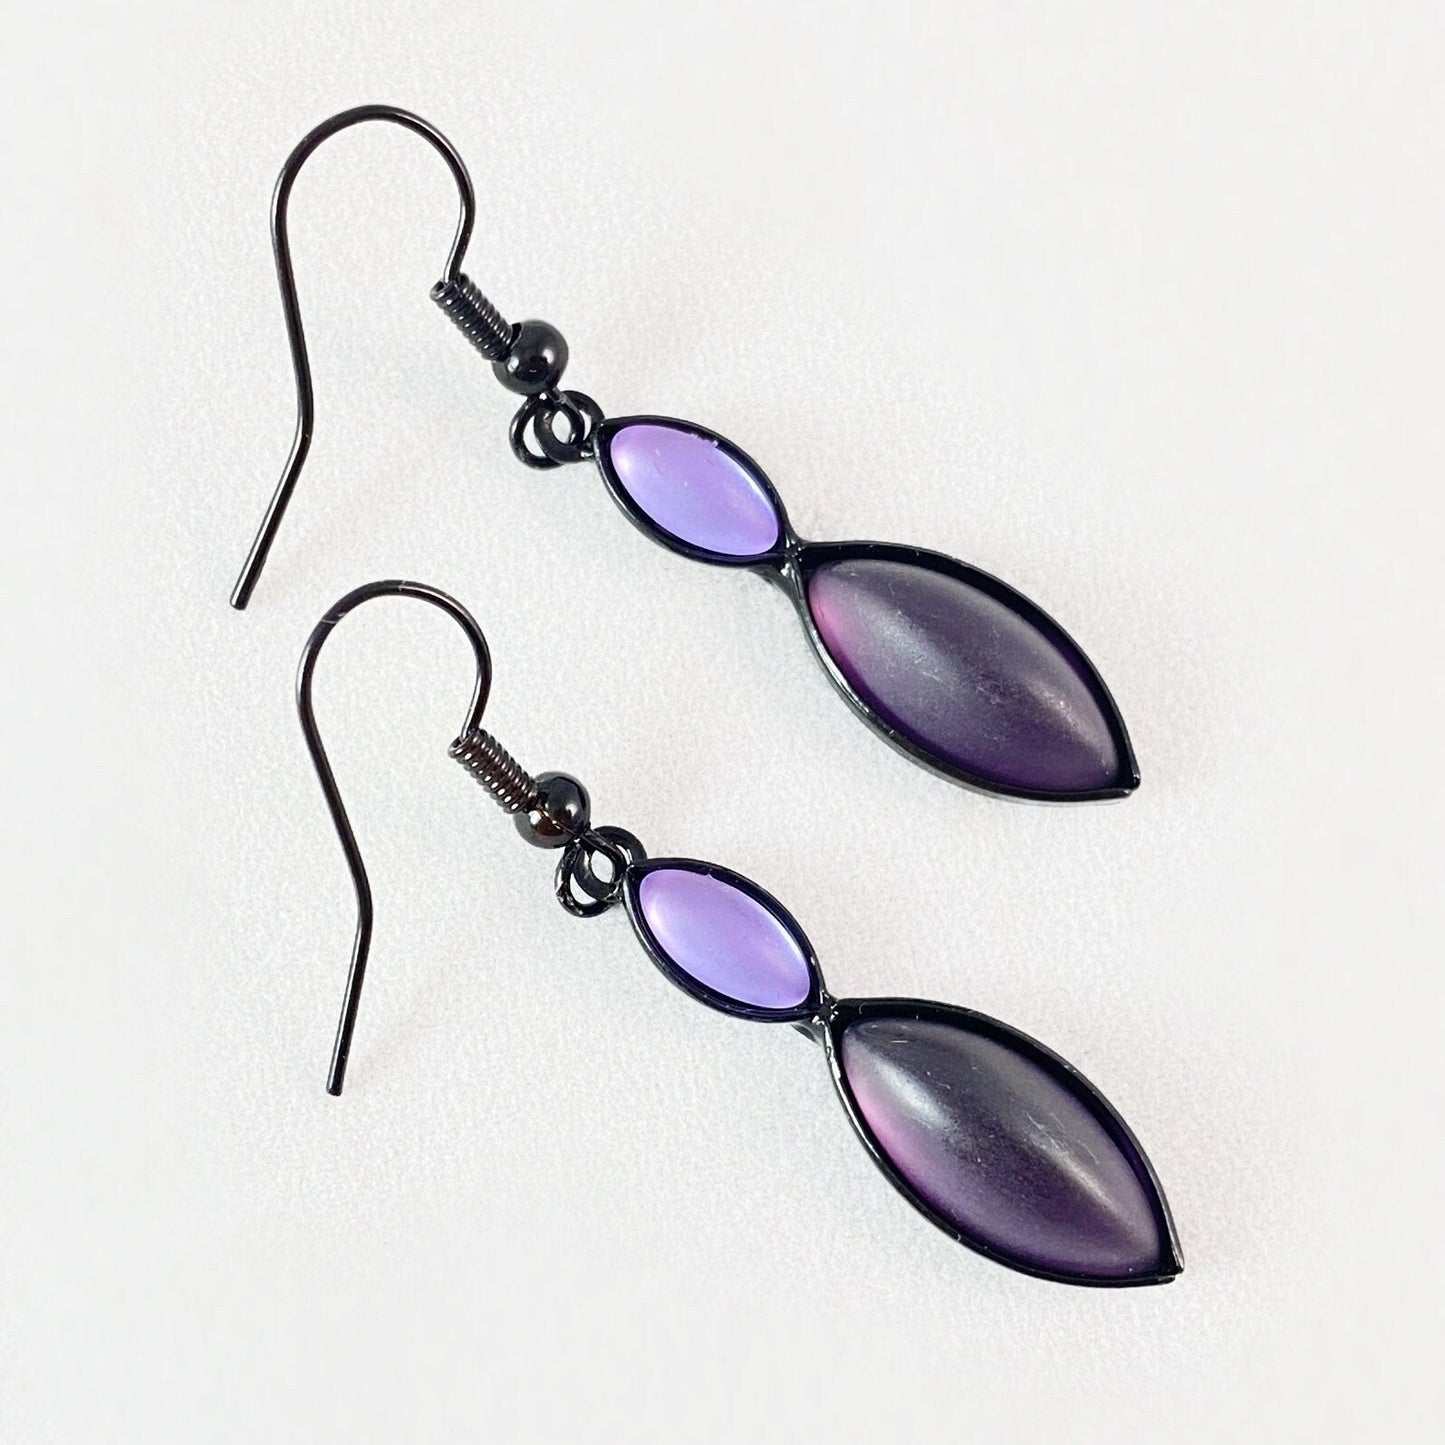 Marquise Shape Earrings with Black Wire and Handmade Glass Beads, Hypoallergenic, Violet/Purple - Kristina